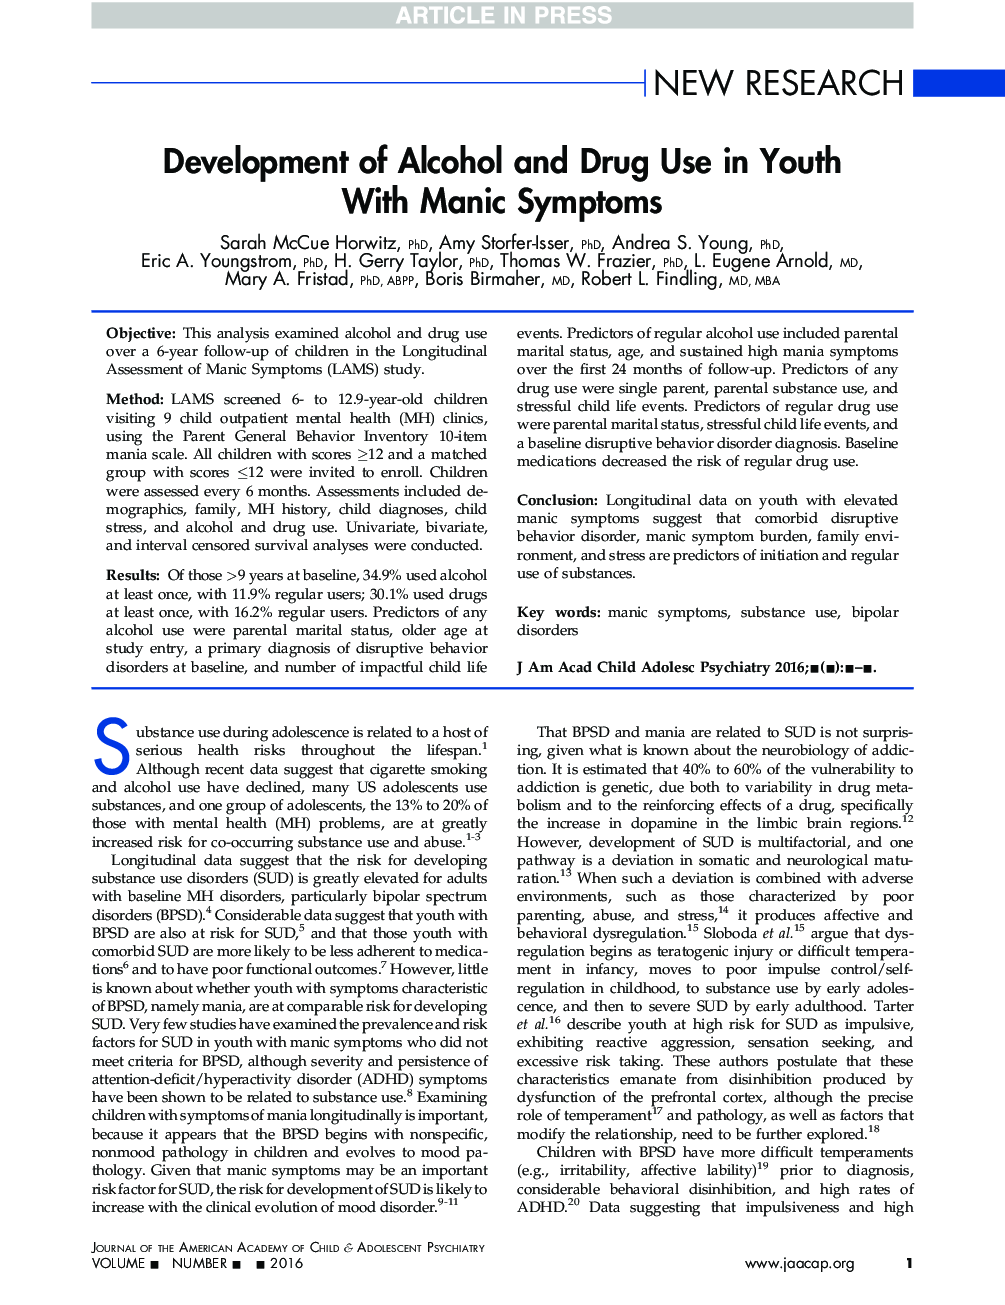 Development of Alcohol and Drug Use in Youth With Manic Symptoms